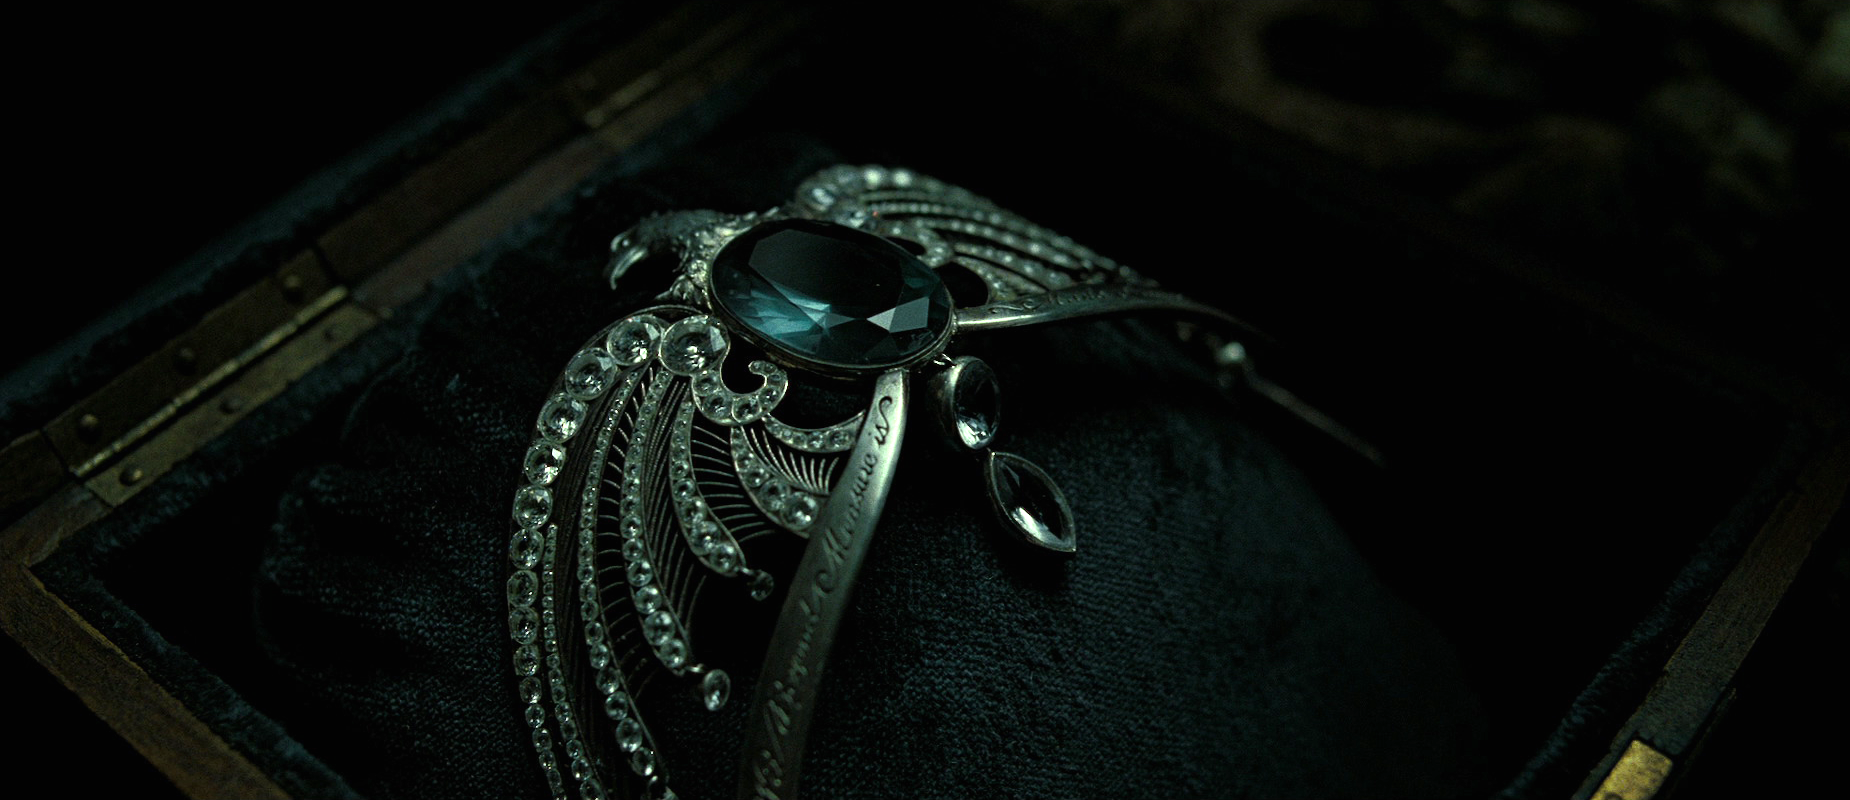 Rowena Ravenclaw's Diadem, one of the Horcruxes from Harry Potter